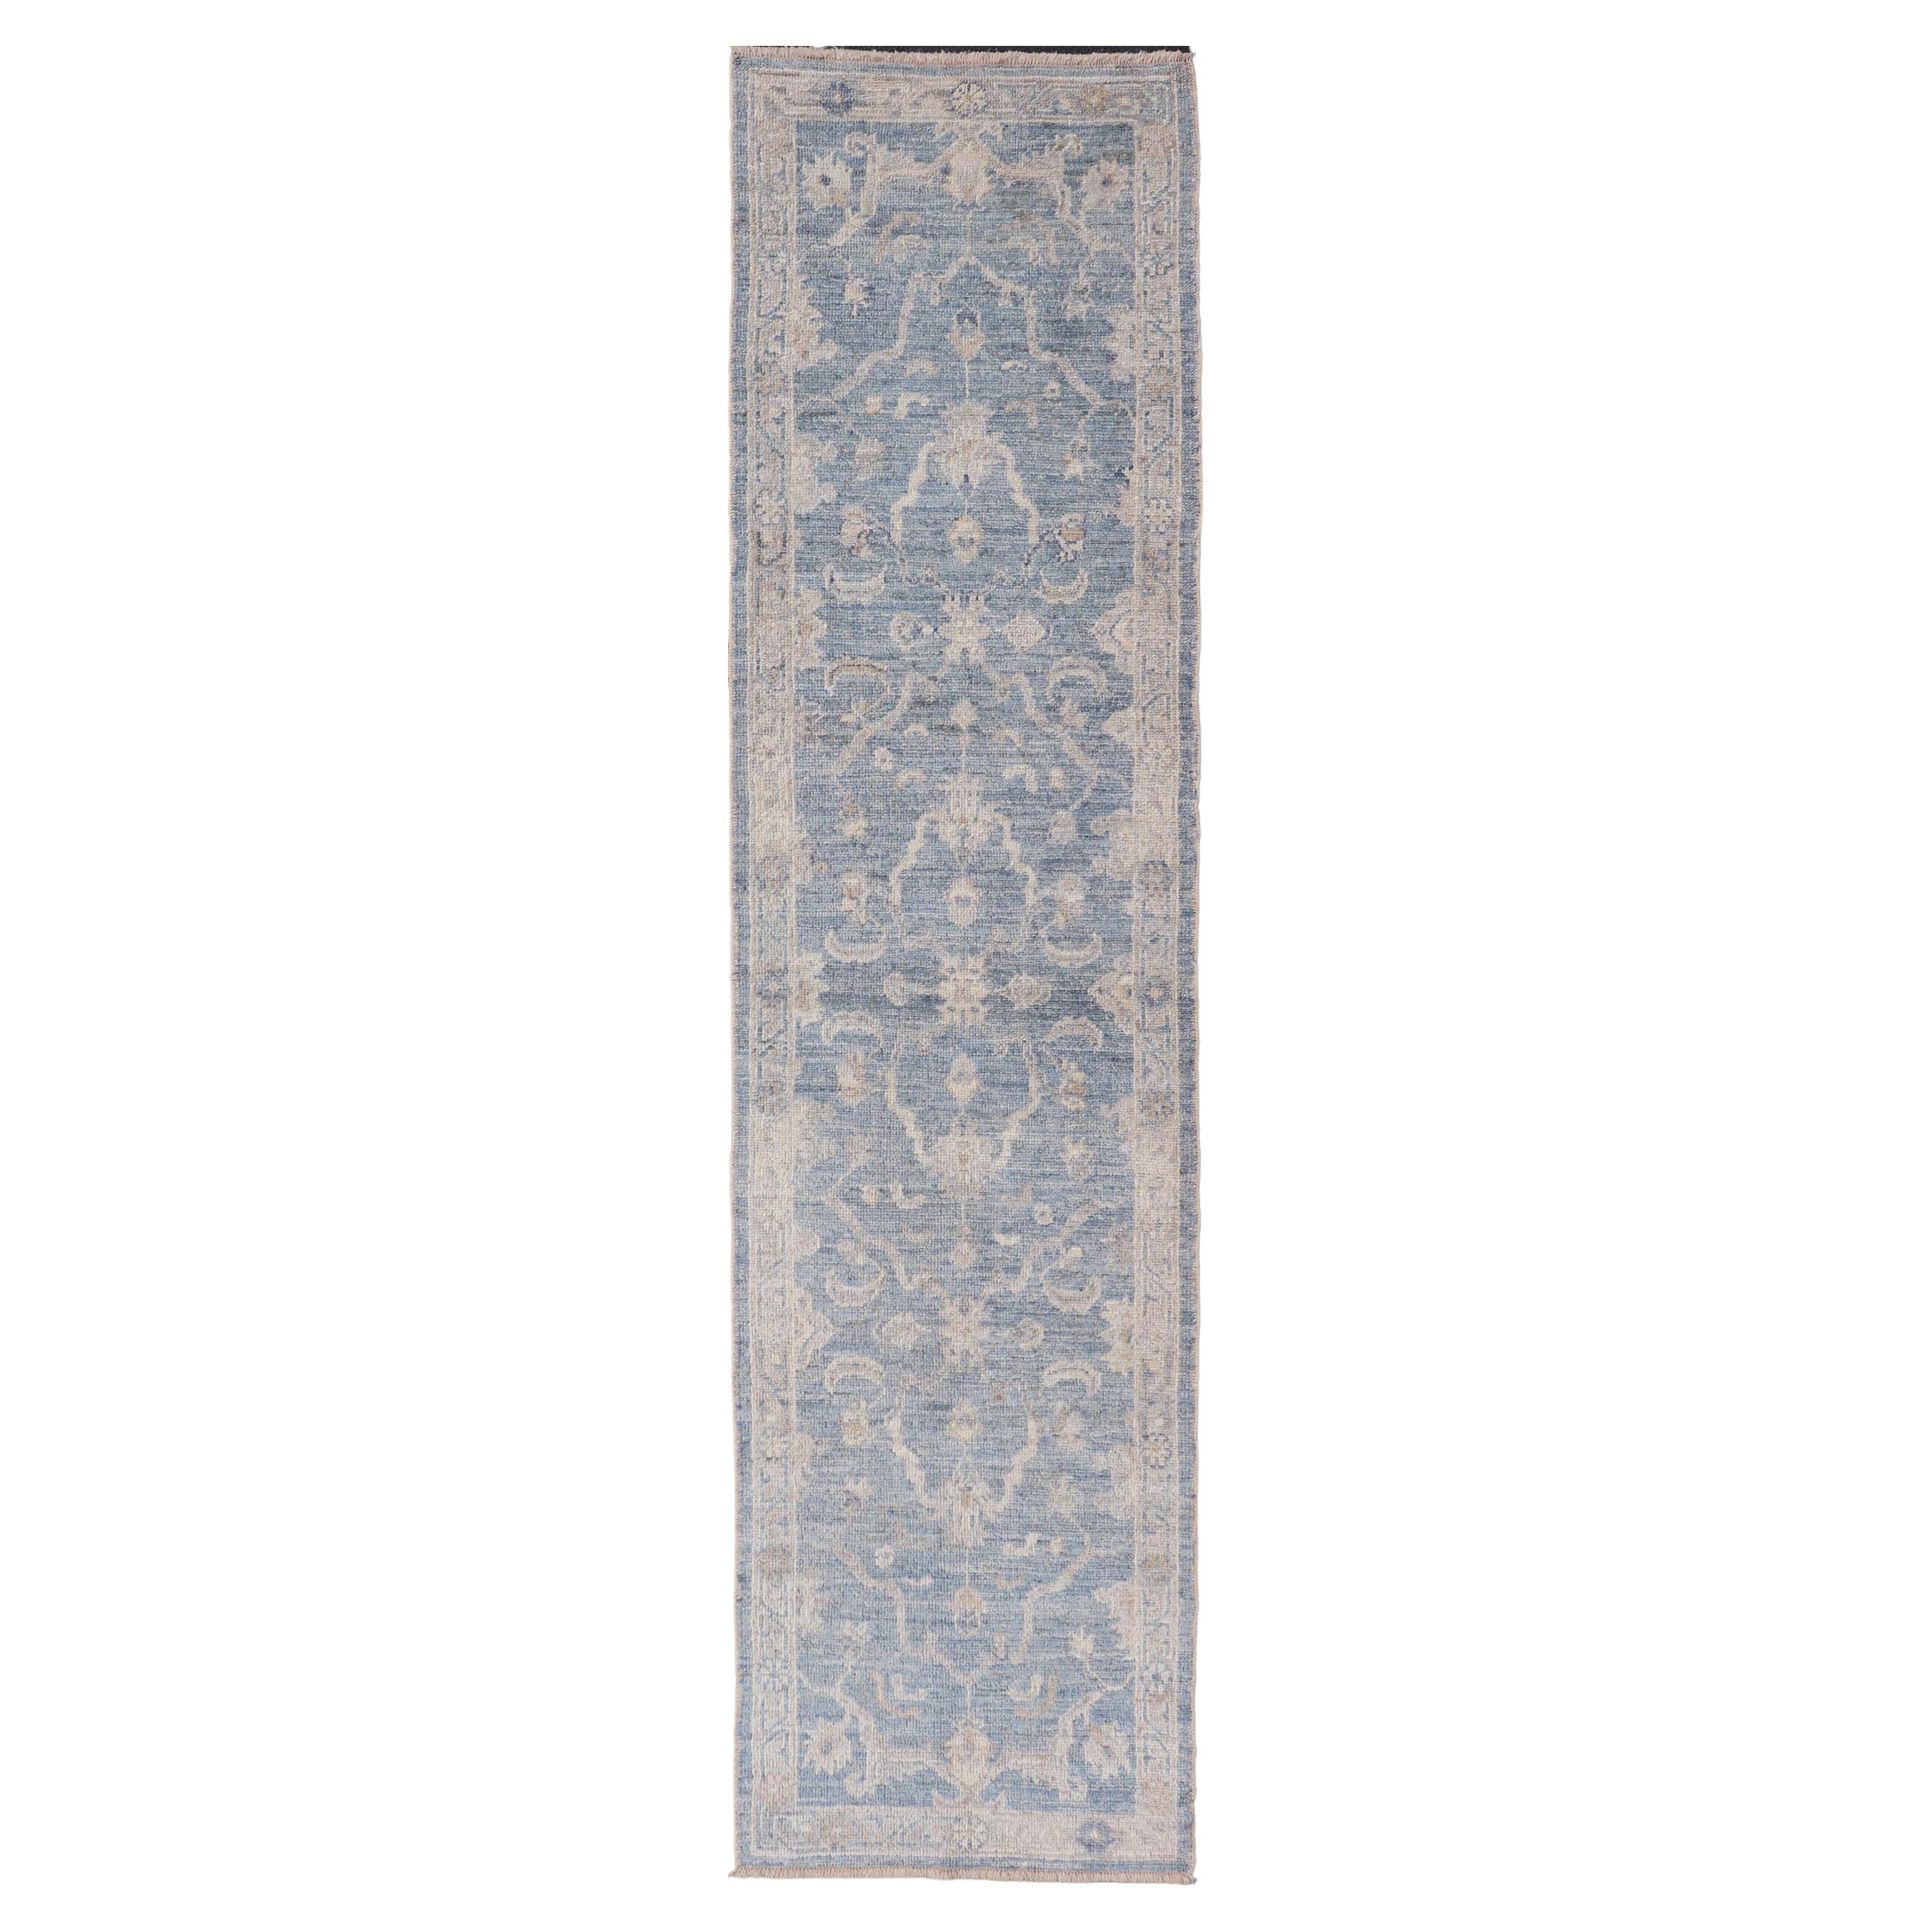 Angora Turkish Oushak Runner with Floral Design and Medium Blue and Gray Border